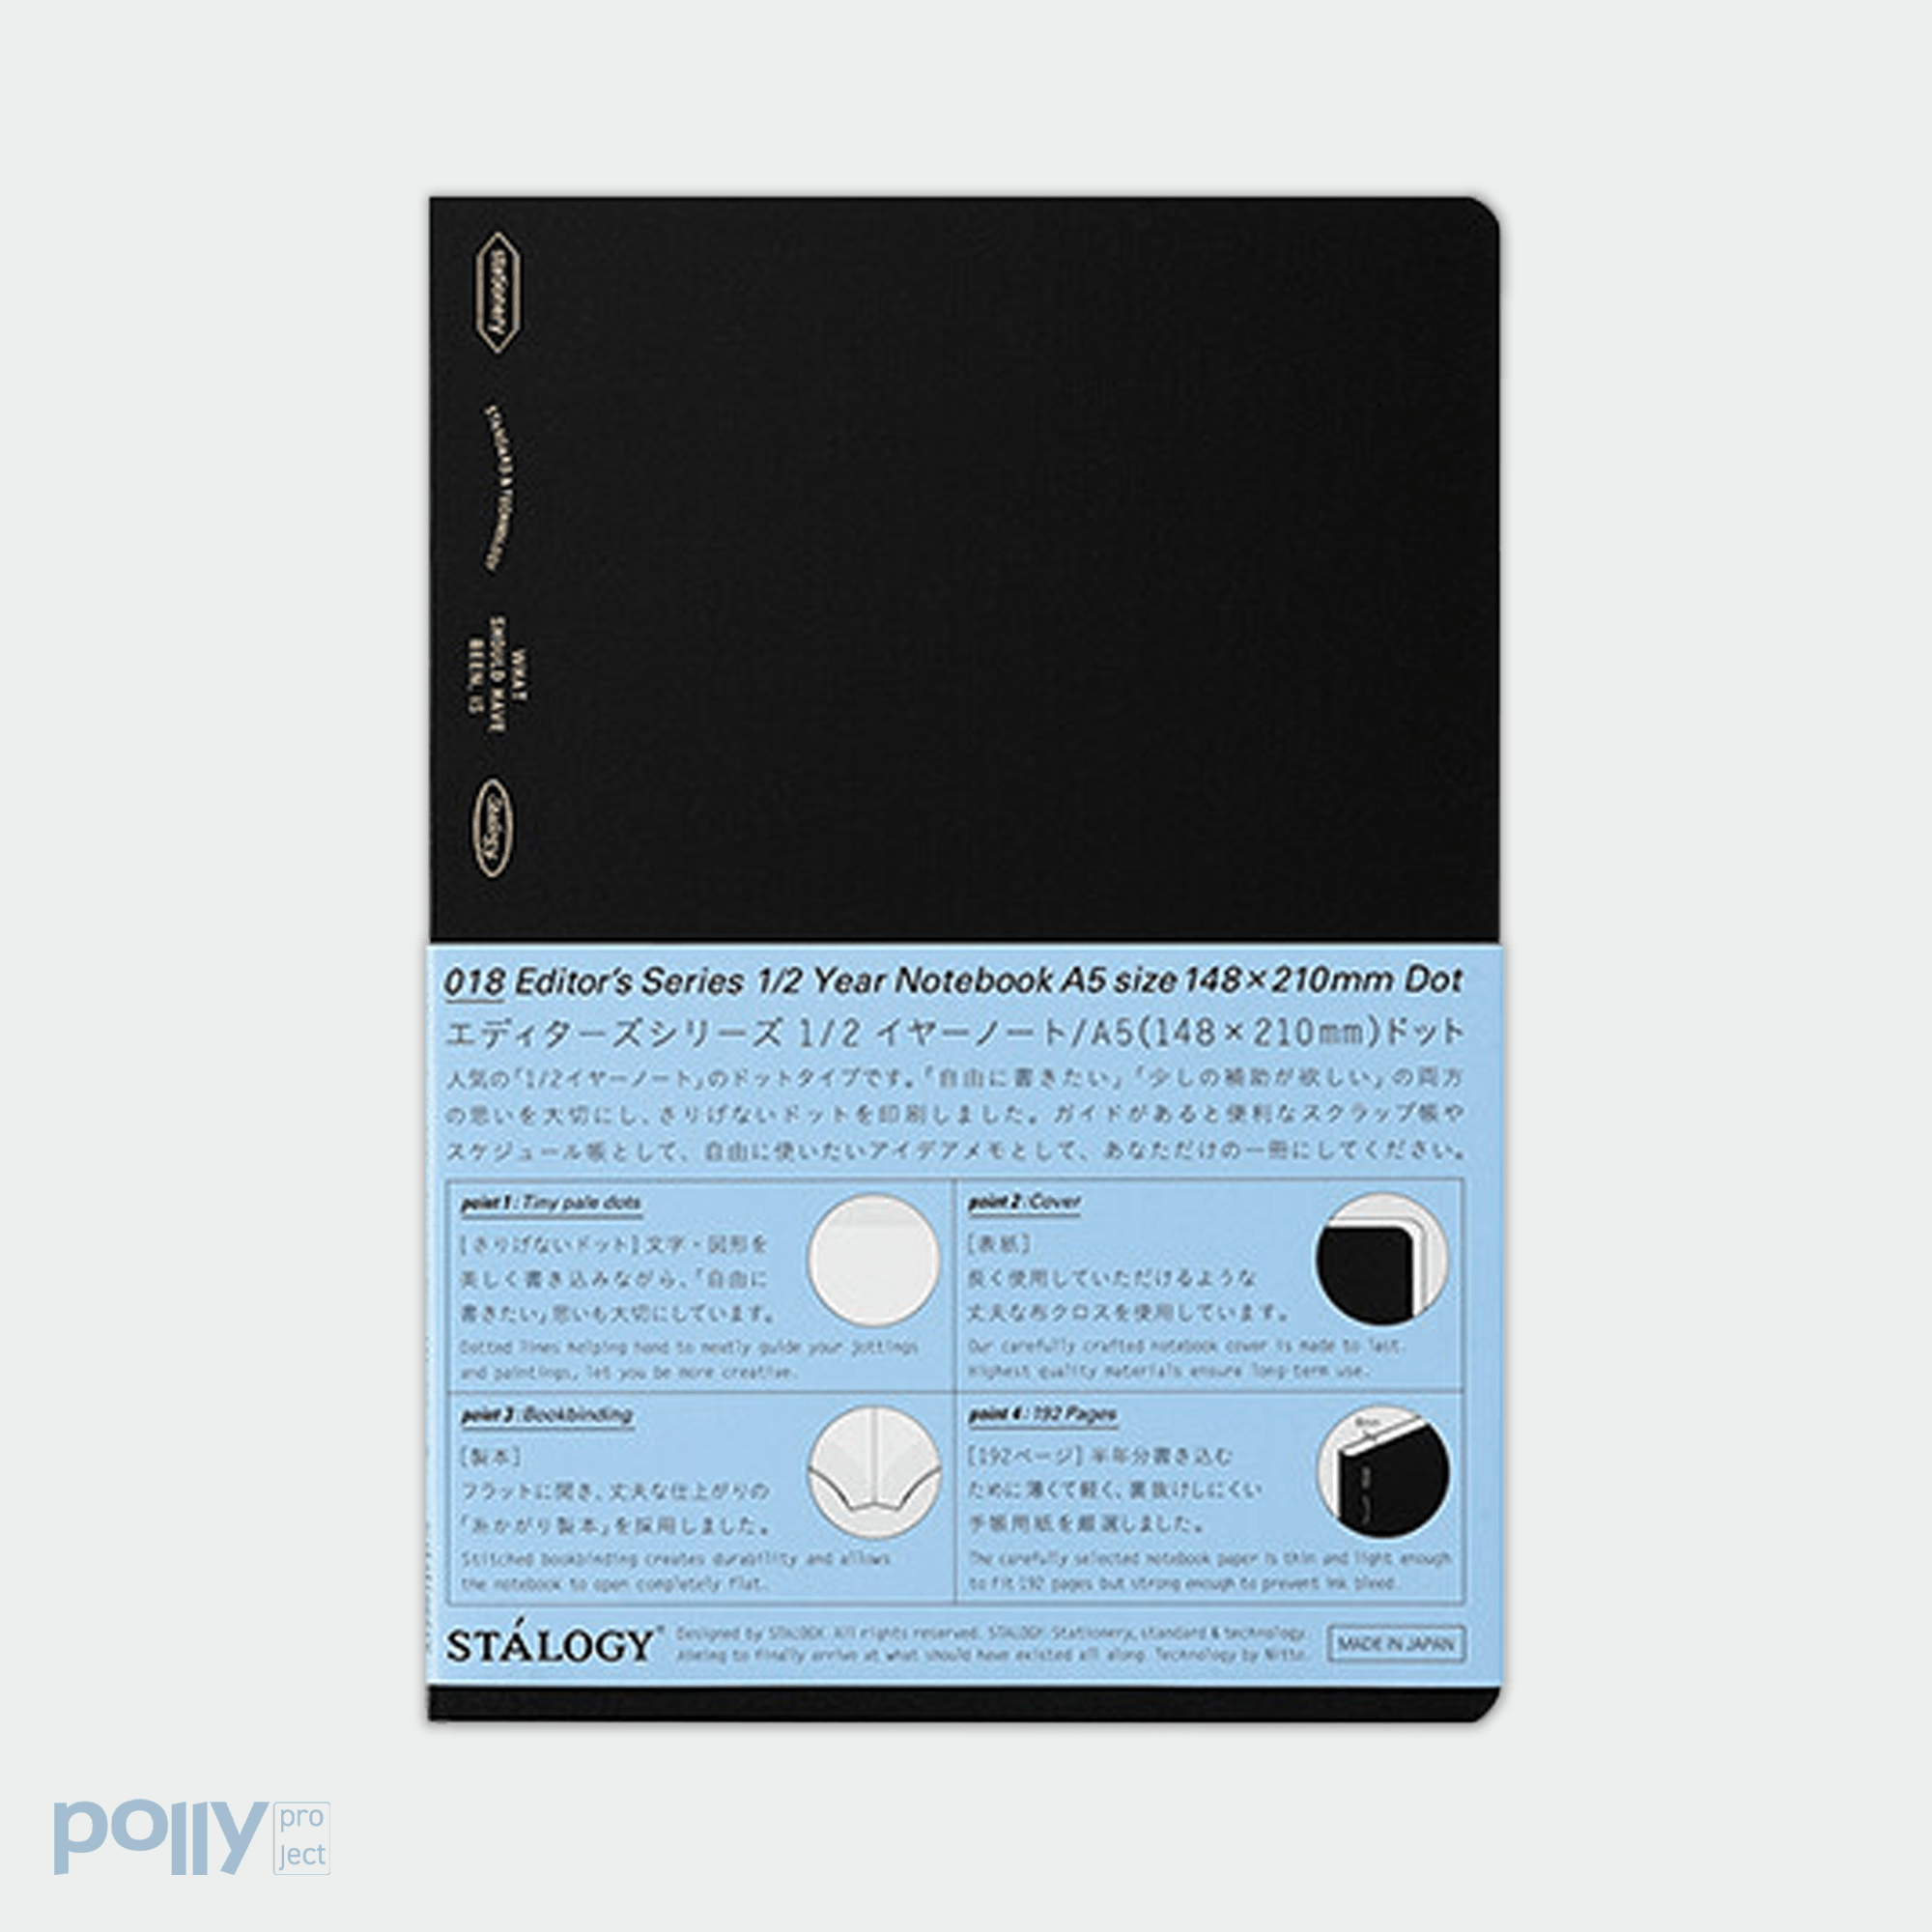 STALOGY Notebook Dotted A5 - Polly Indonesia